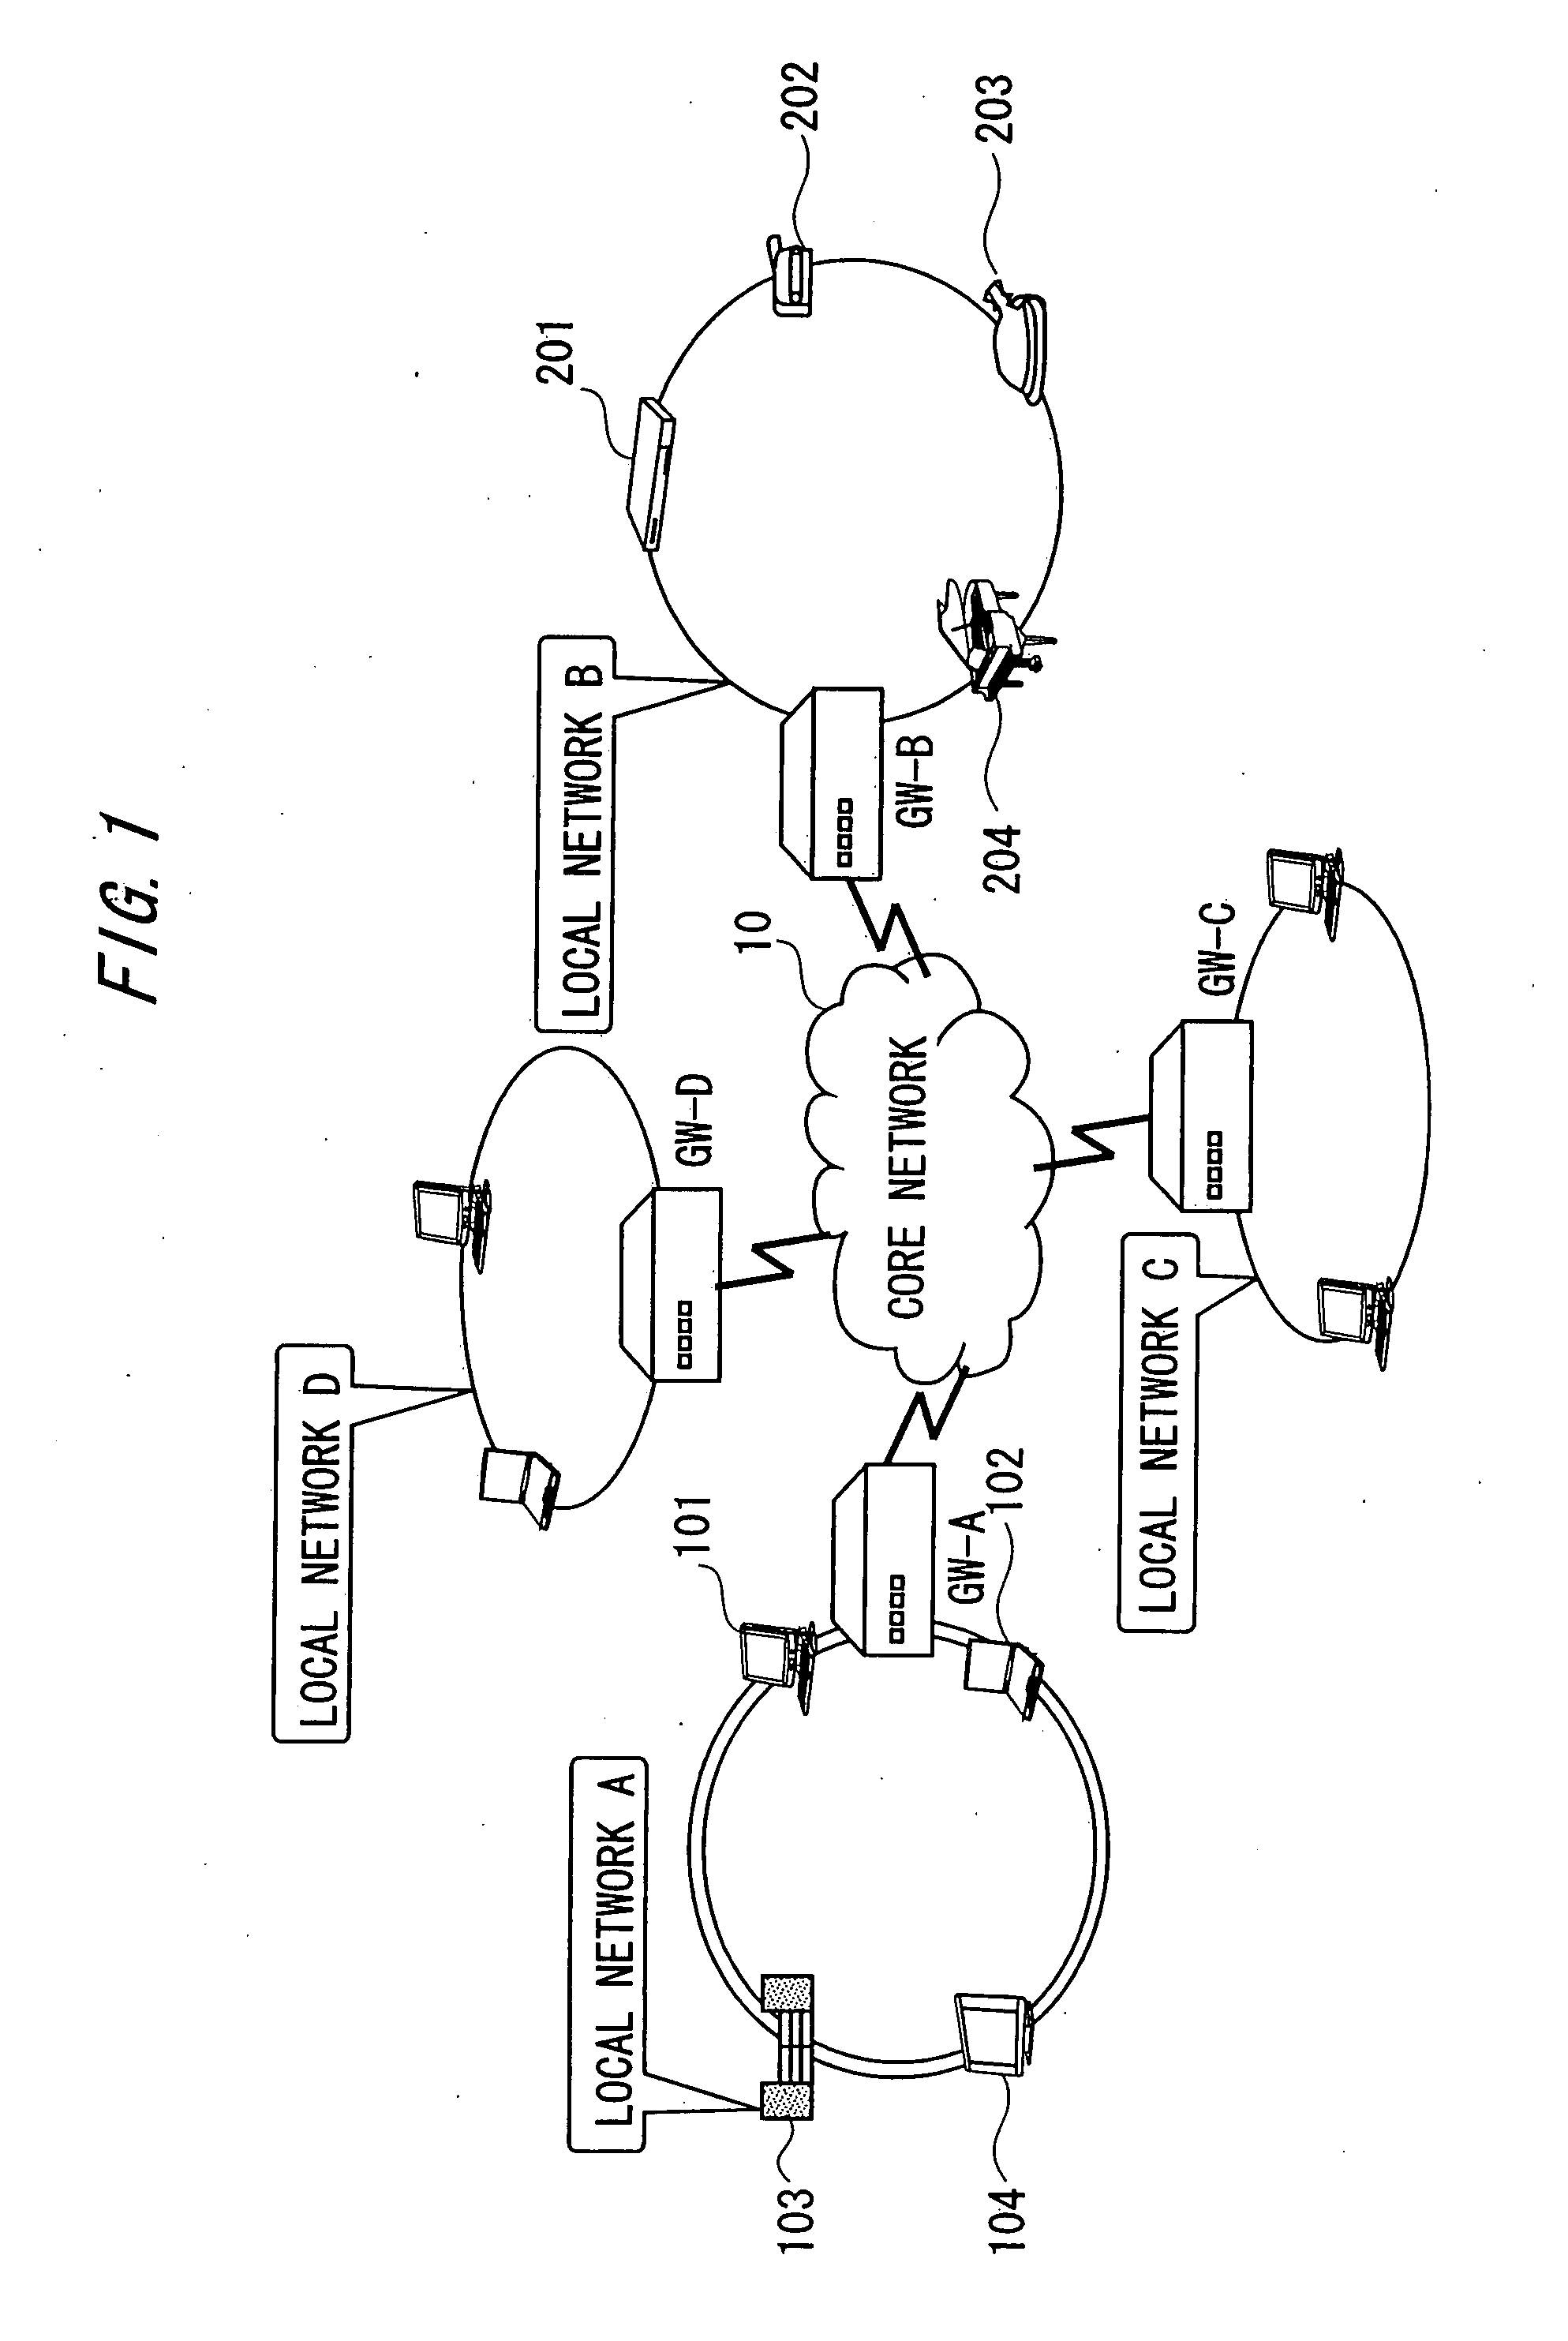 Packet relay device